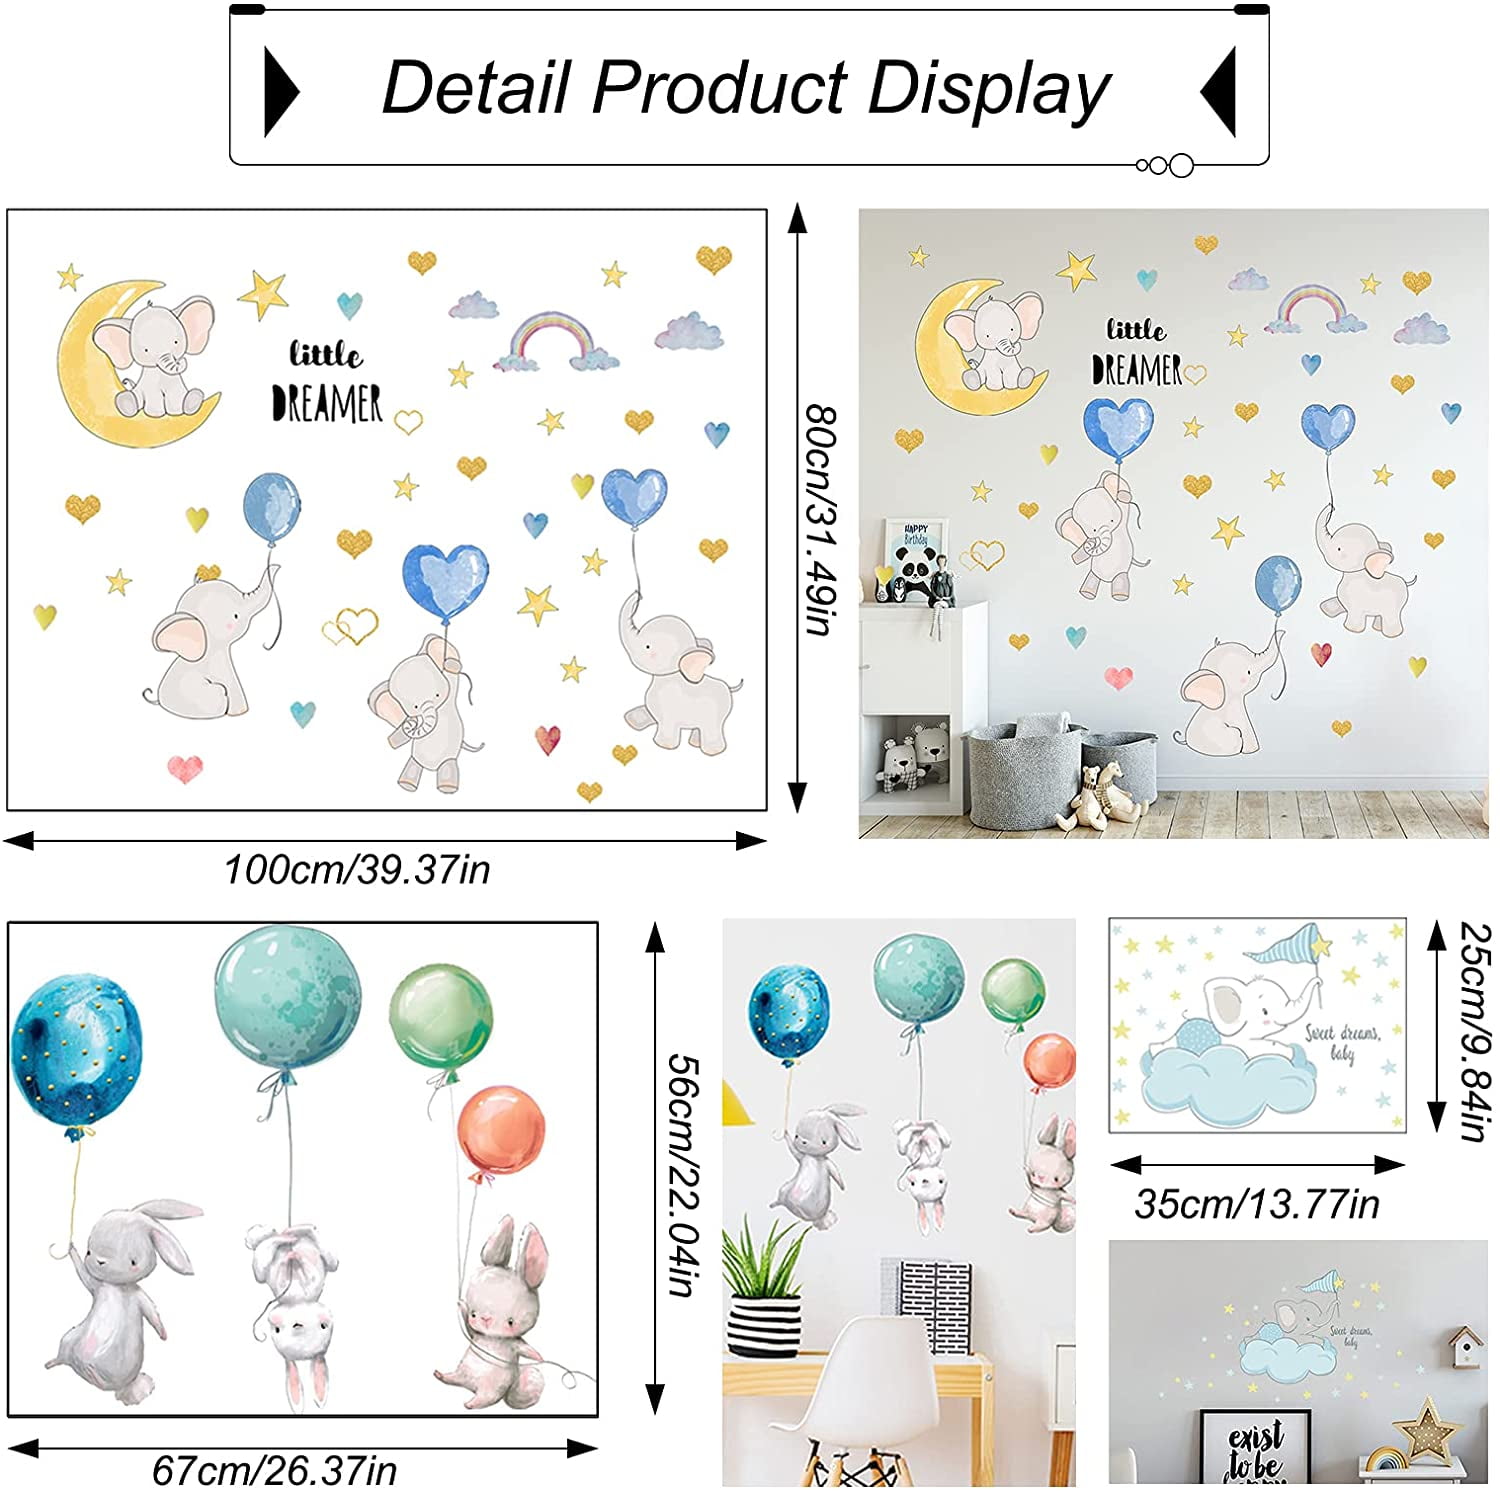 Stars Removable DIY Wall Decor for Kids Girls Baby Bedroom Classroom Nursery Home Decoration HOLENGS Cute Balloons Flying Animals Wall Stickers 3Sets Cartoon Elephant Rabbit Wall Decals 